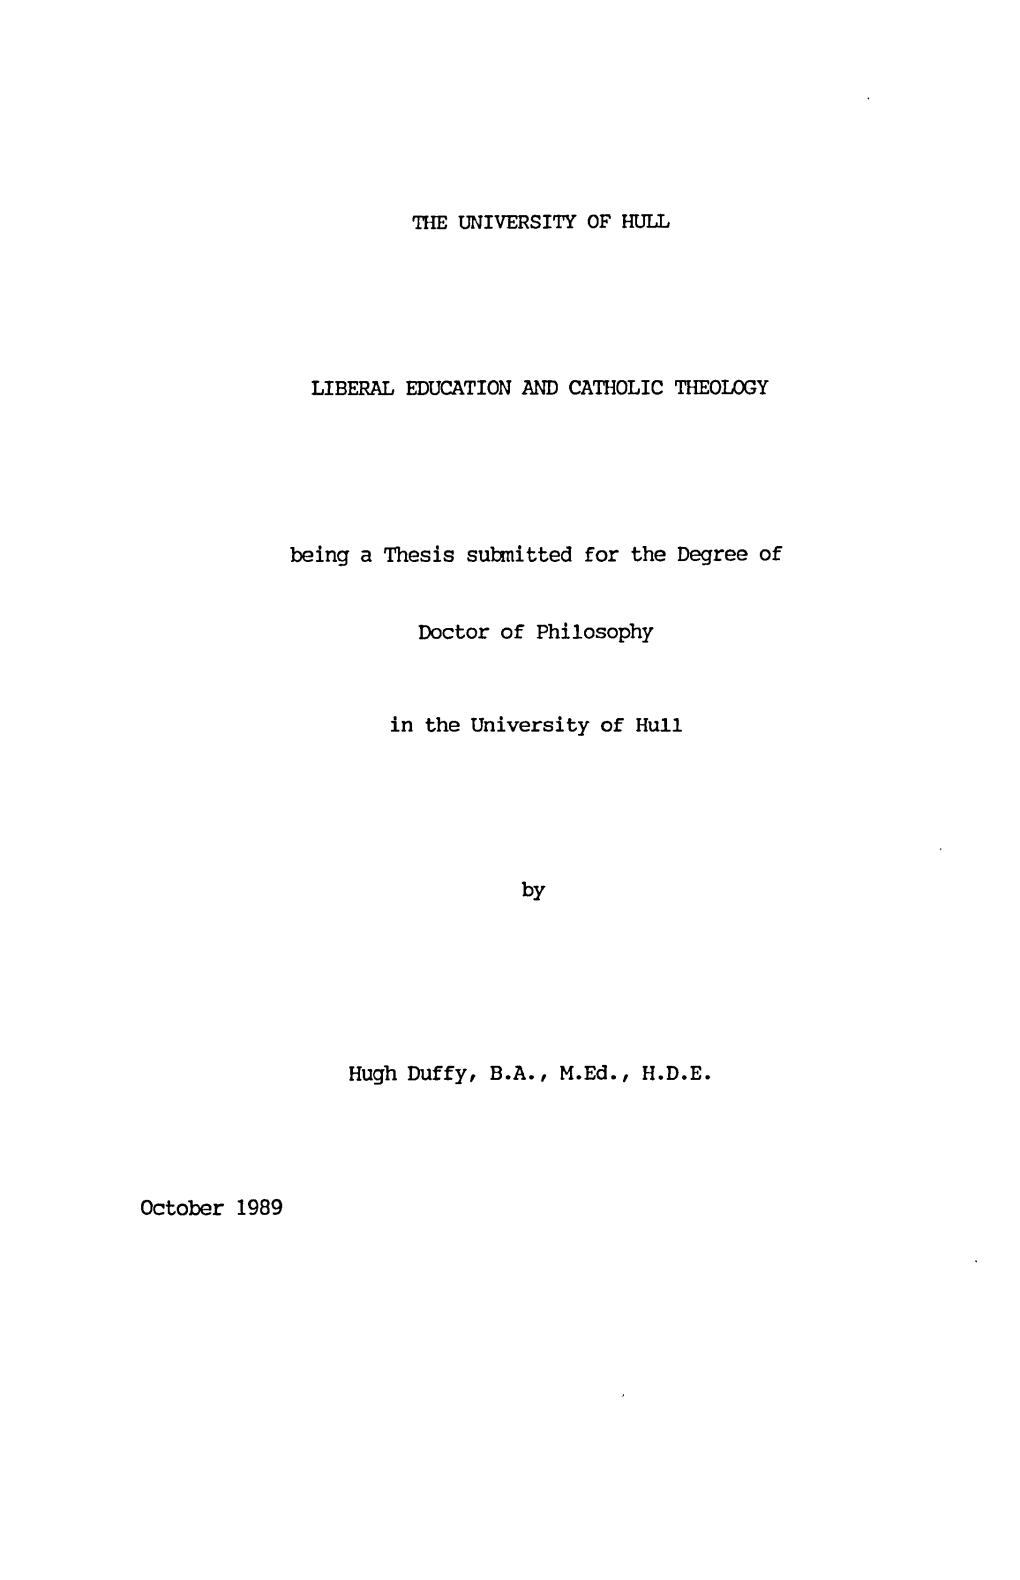 Being a Thesis Submitted for the Degree of October 1989